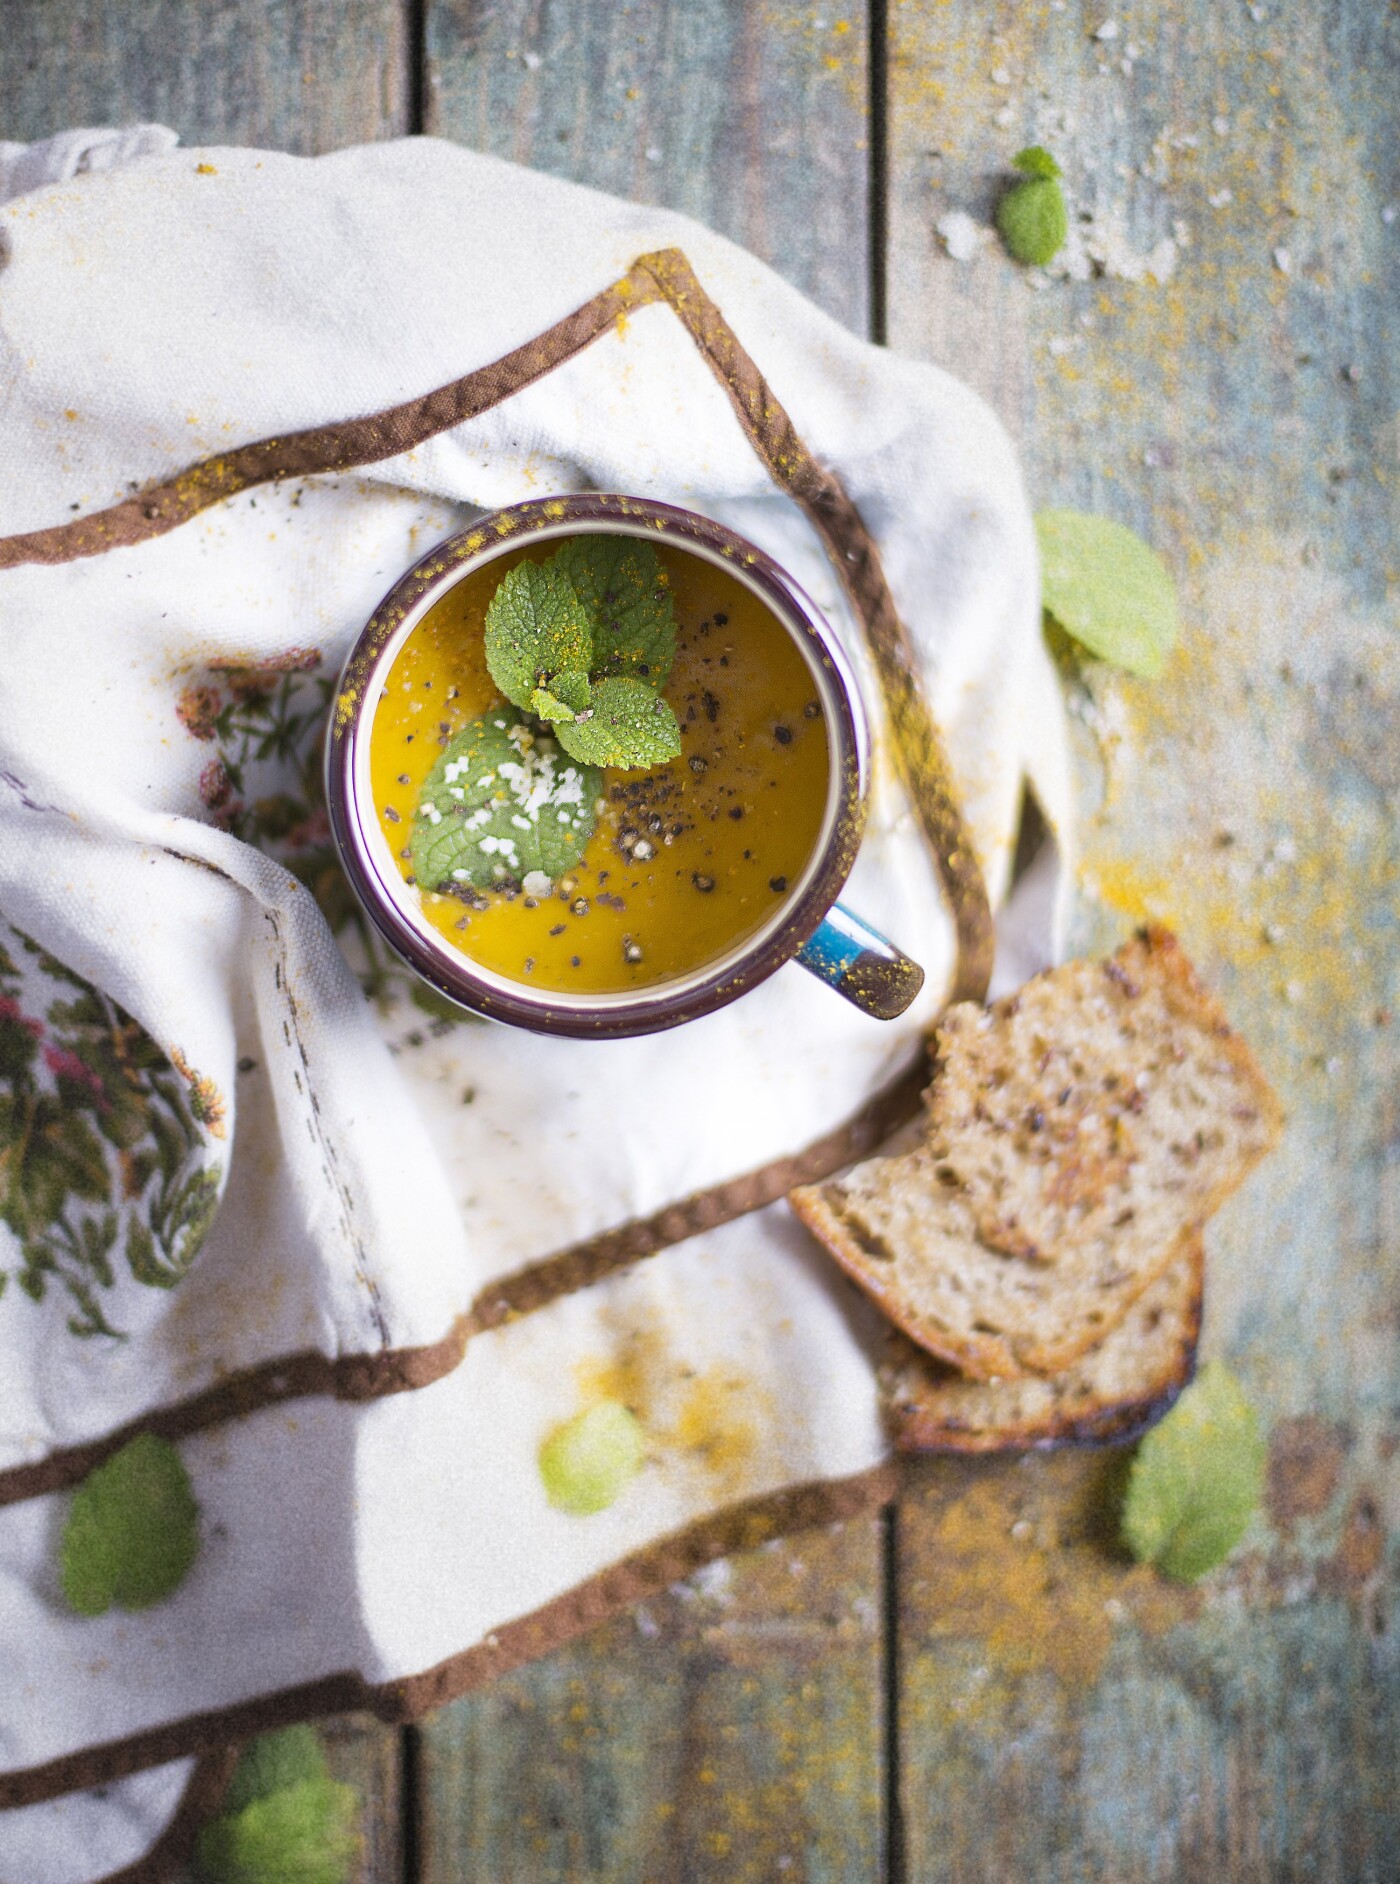 Delicious creamy soup with a touch of sea salt and fresh mint leaves as a perfect winter meal - the picture will be featured in the cook book :)